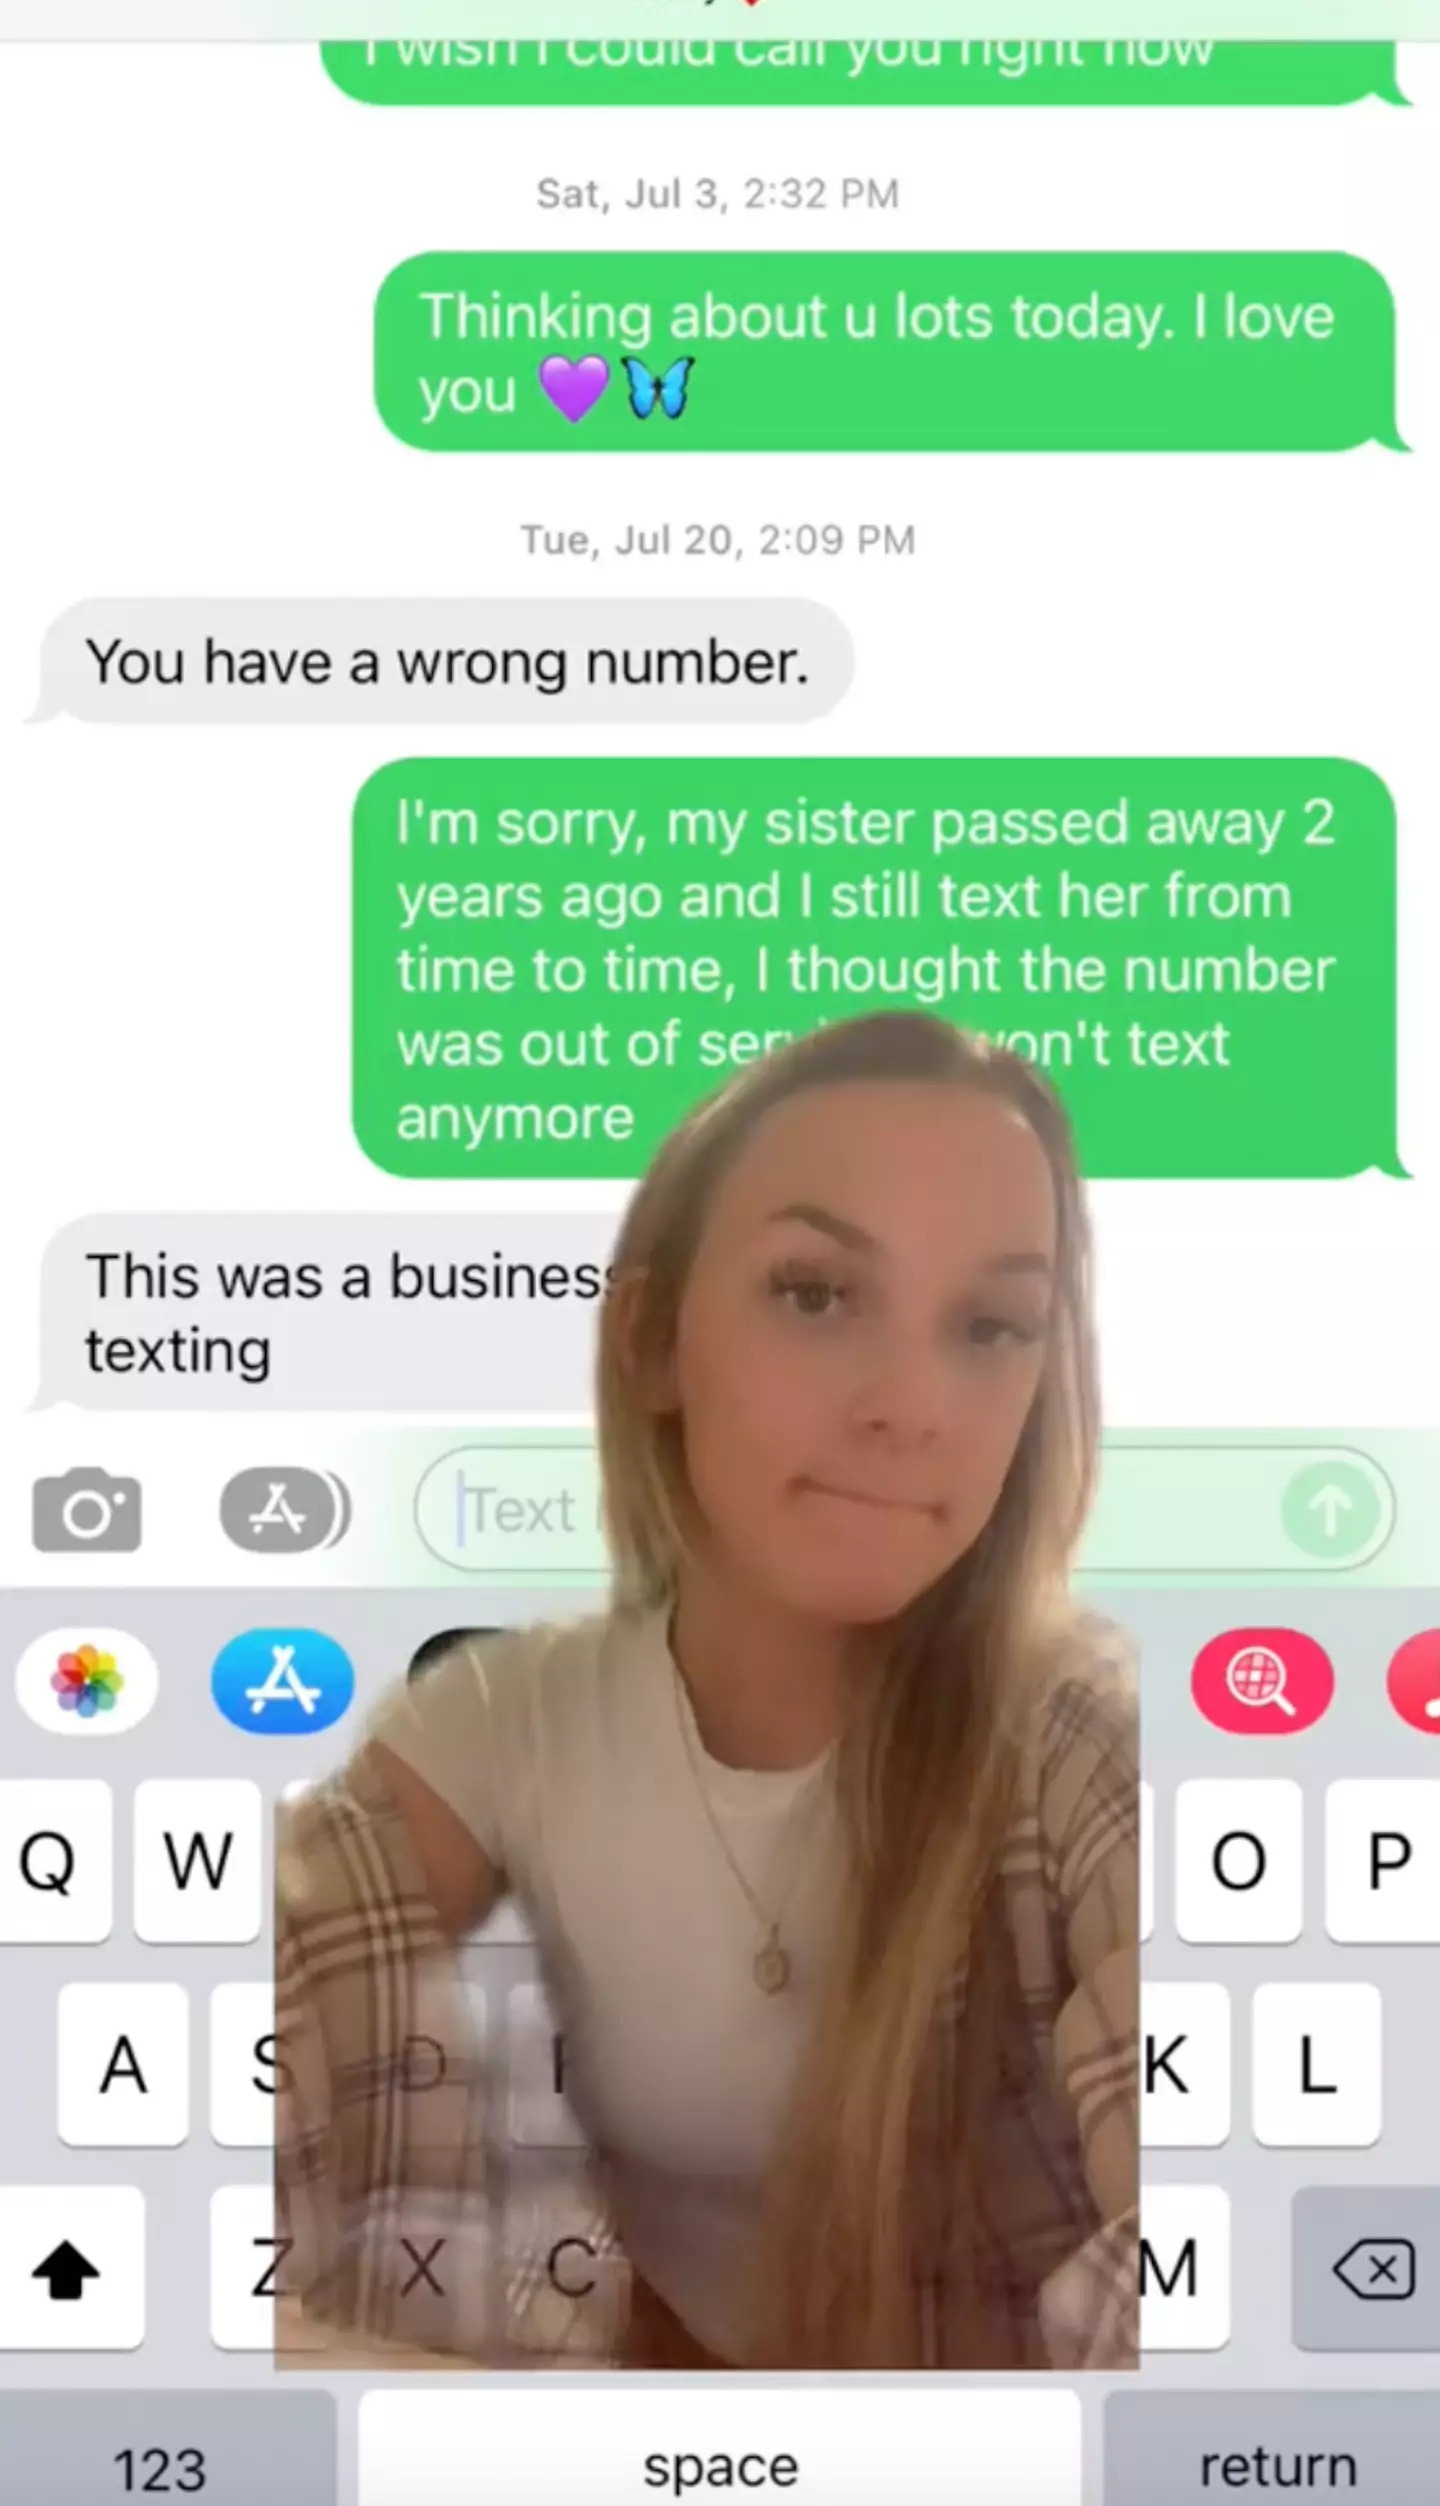 The woman had been texting her sister's phone (